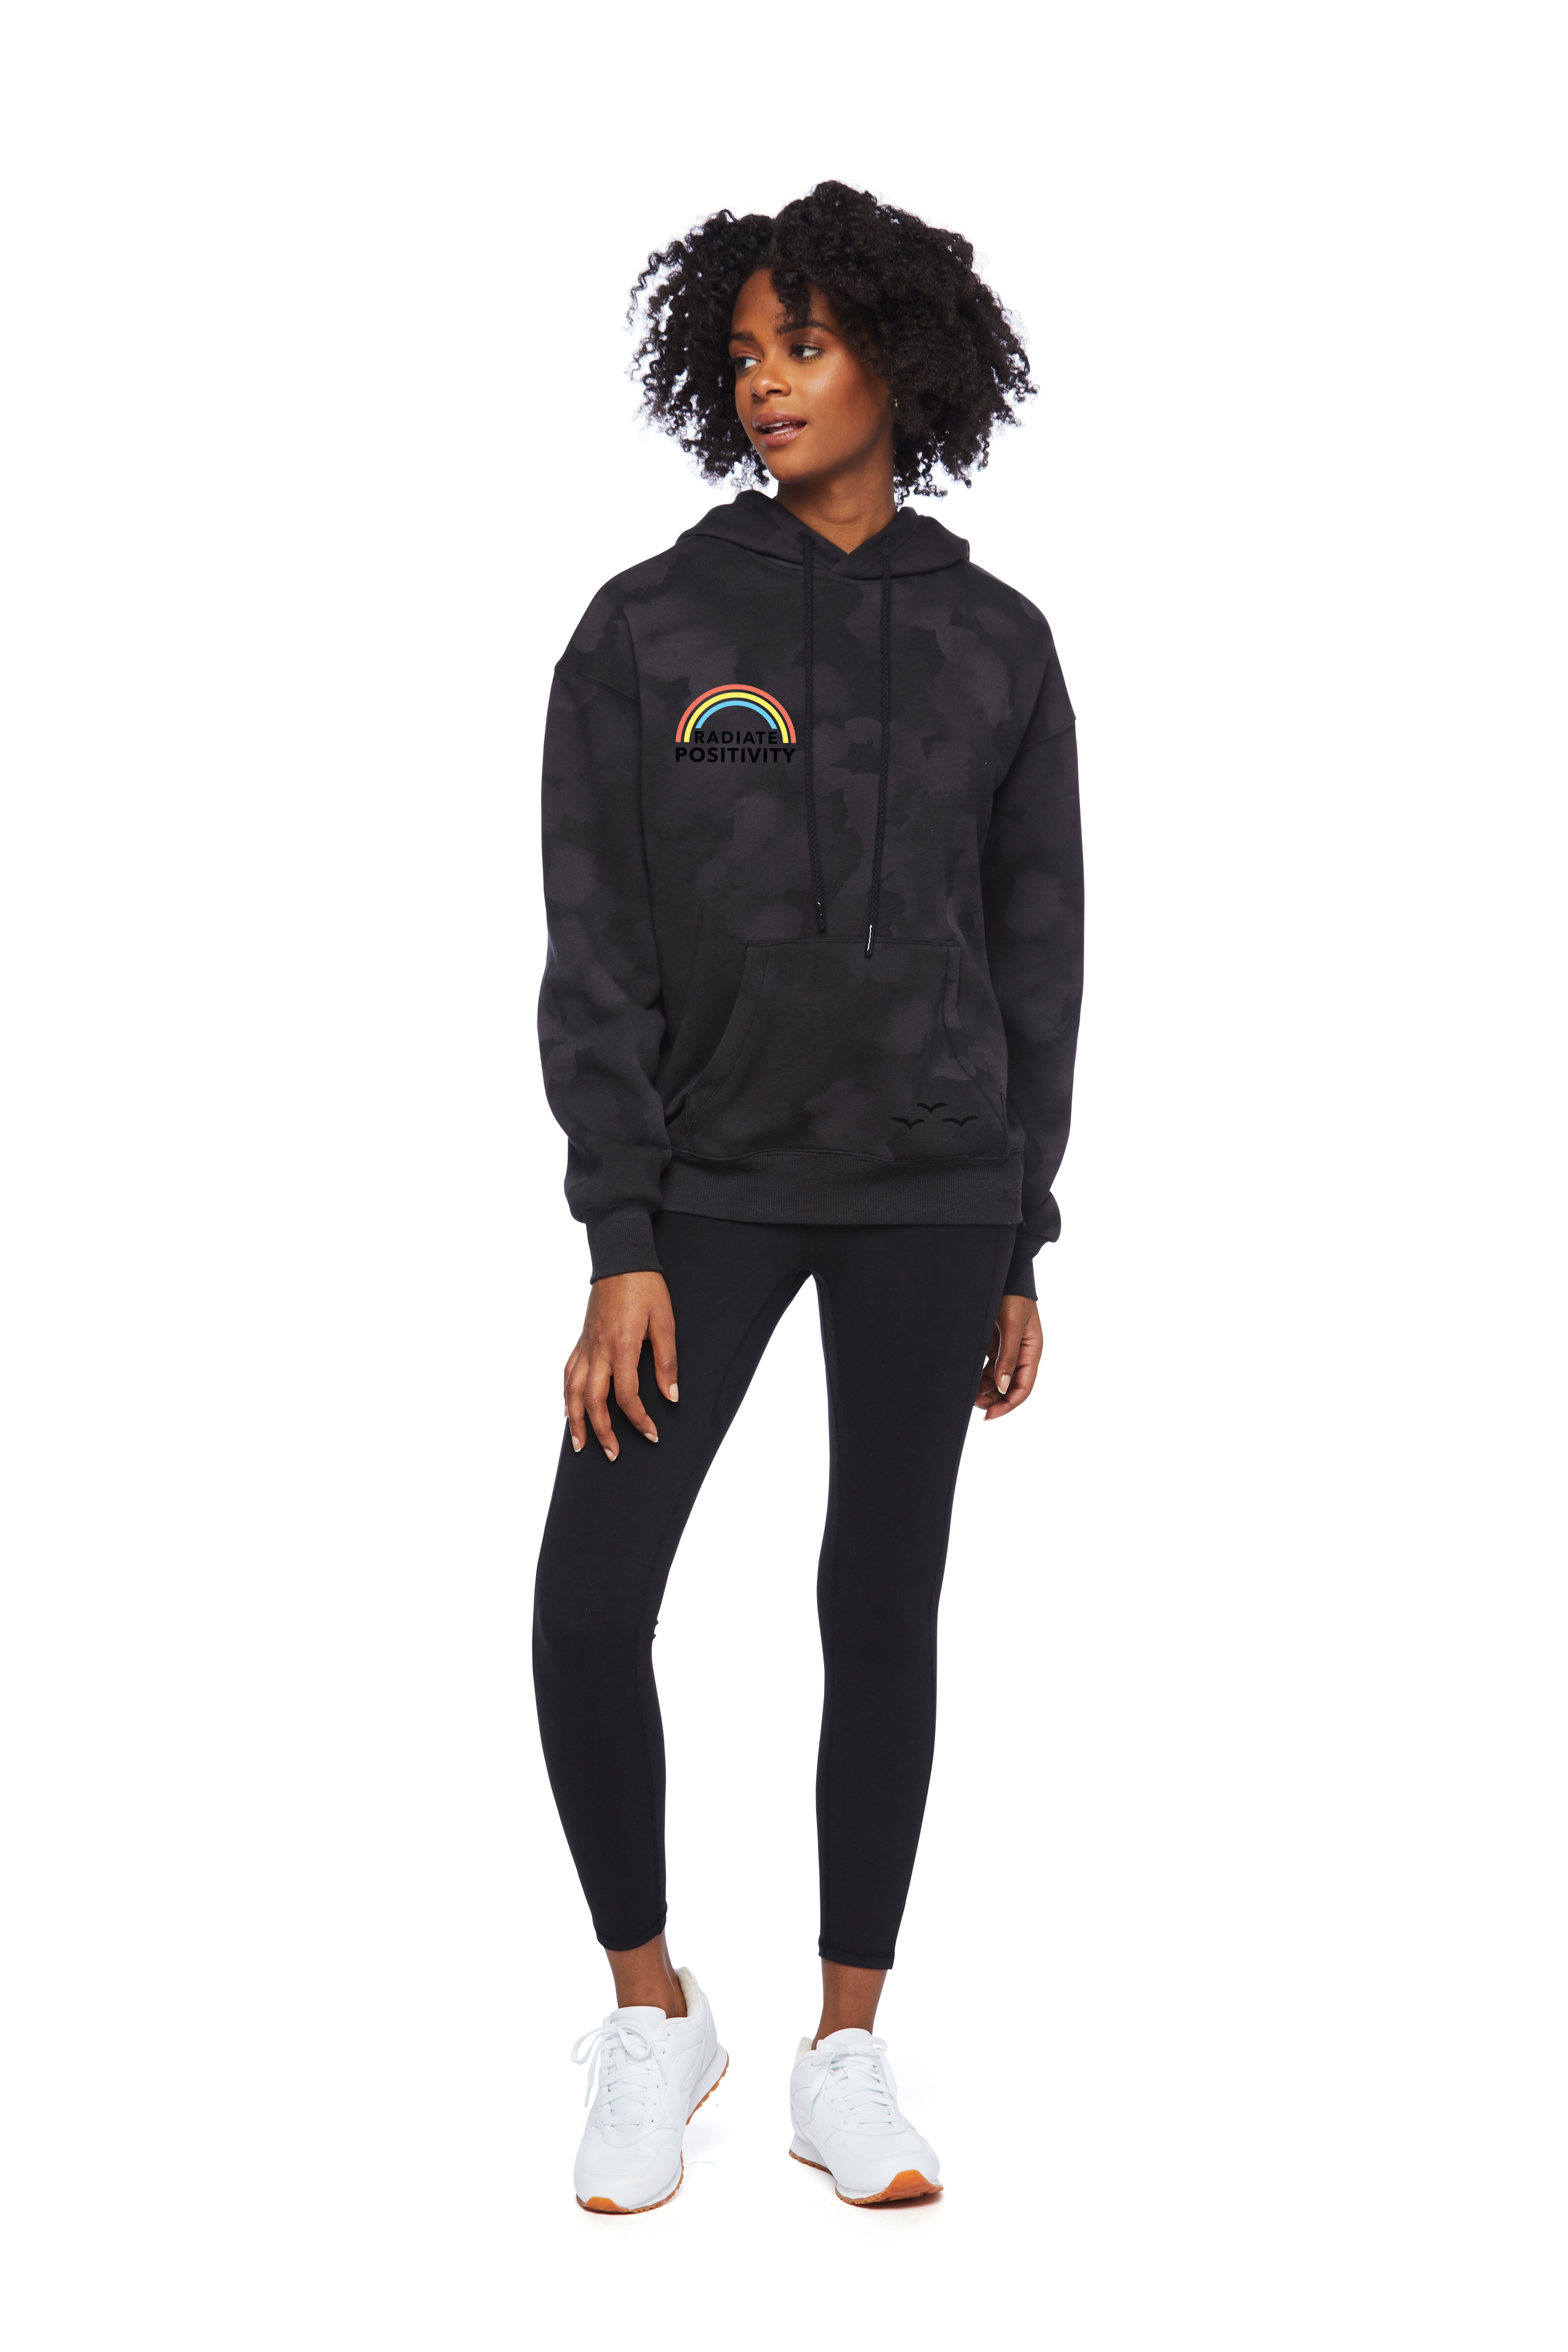 Chloe Earth Day Hoodie in Black Sponge from Lazypants - always a great buy at a reasonable price.